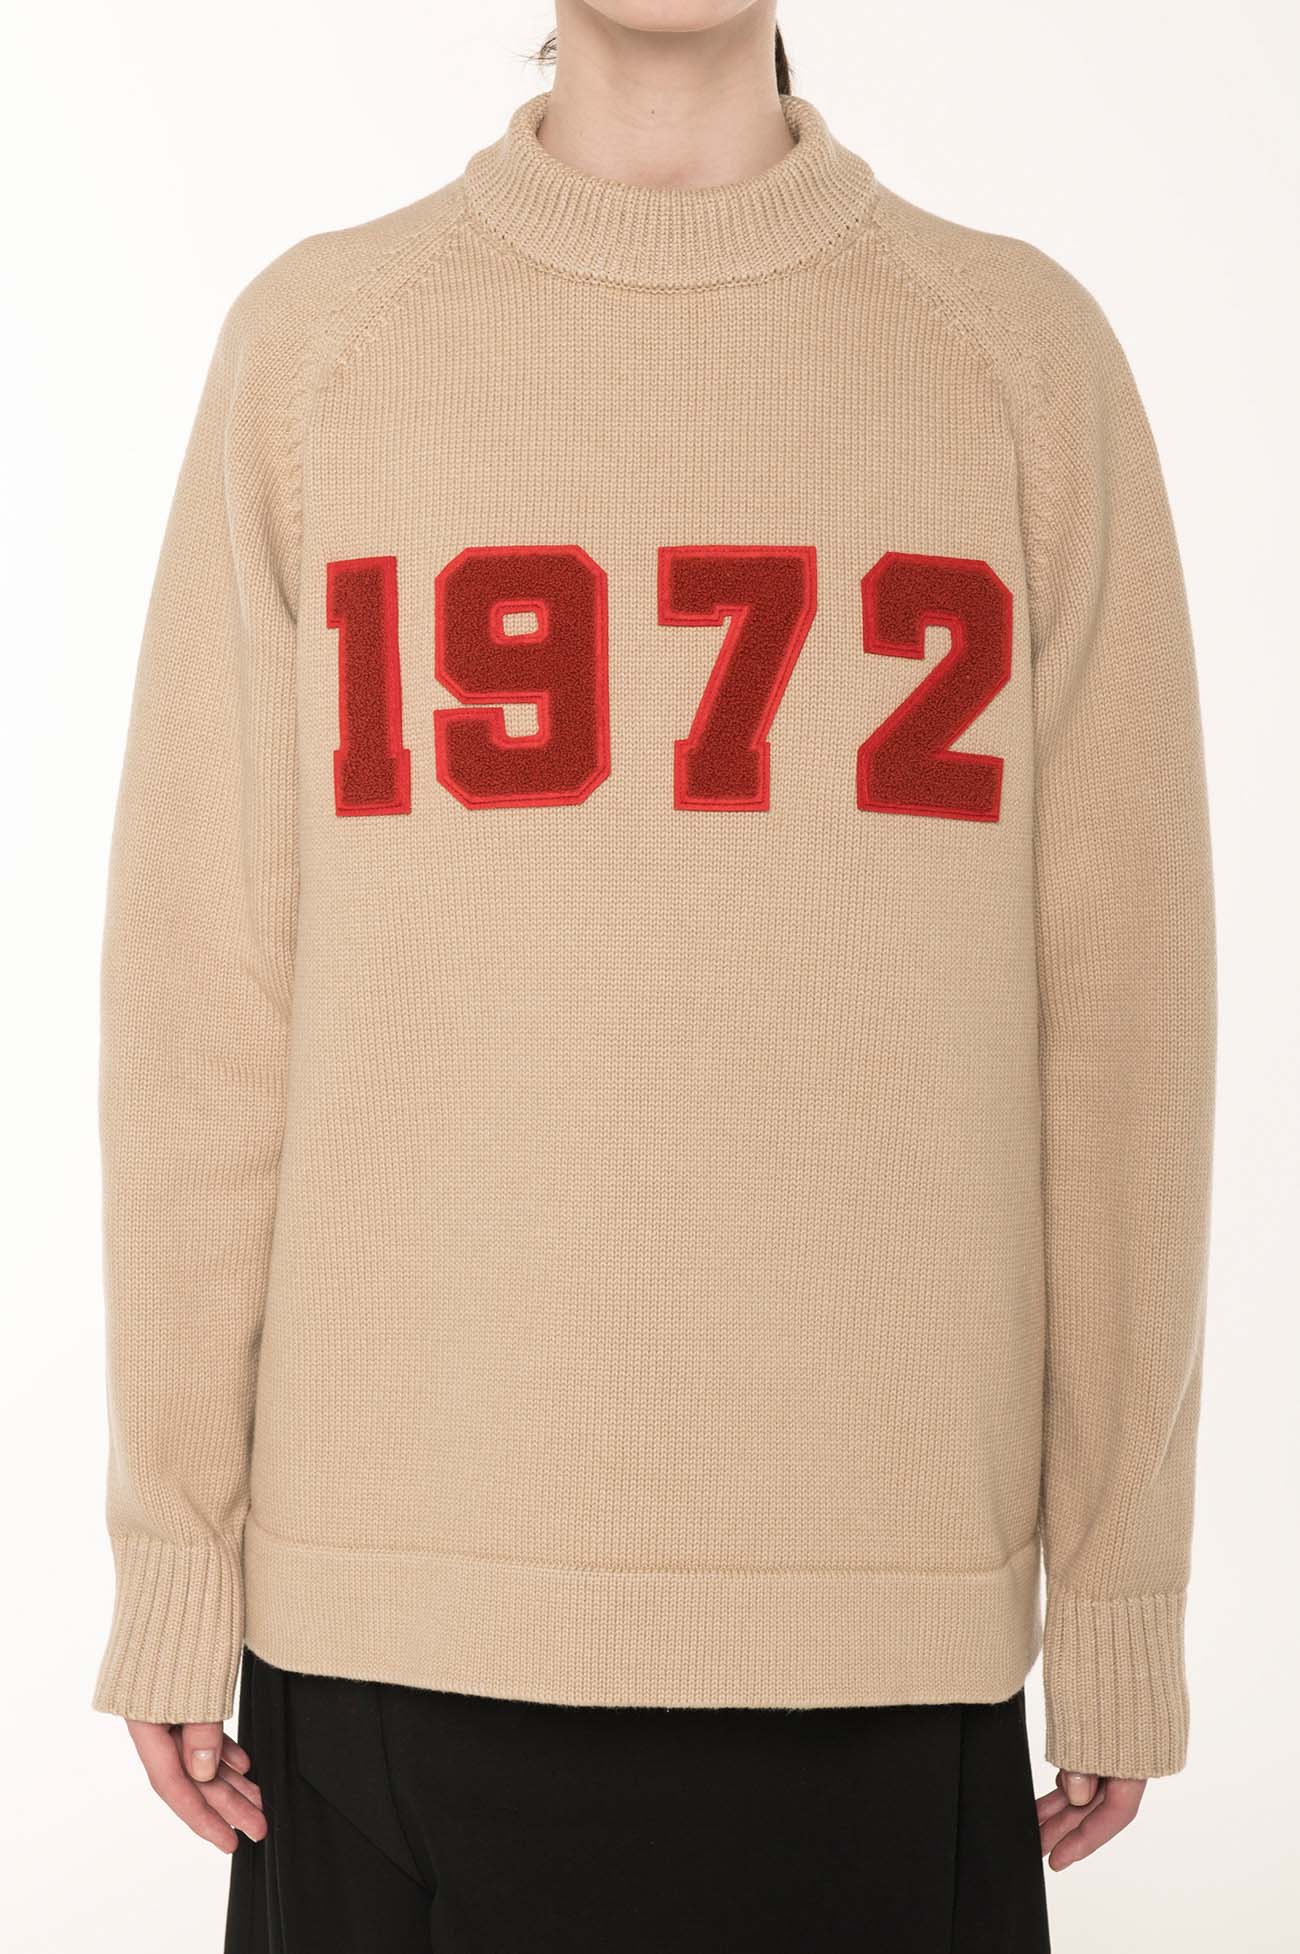 [Y's 1972 - Traditions] COTTON POLYESTER 1972 PULLOVER KNIT